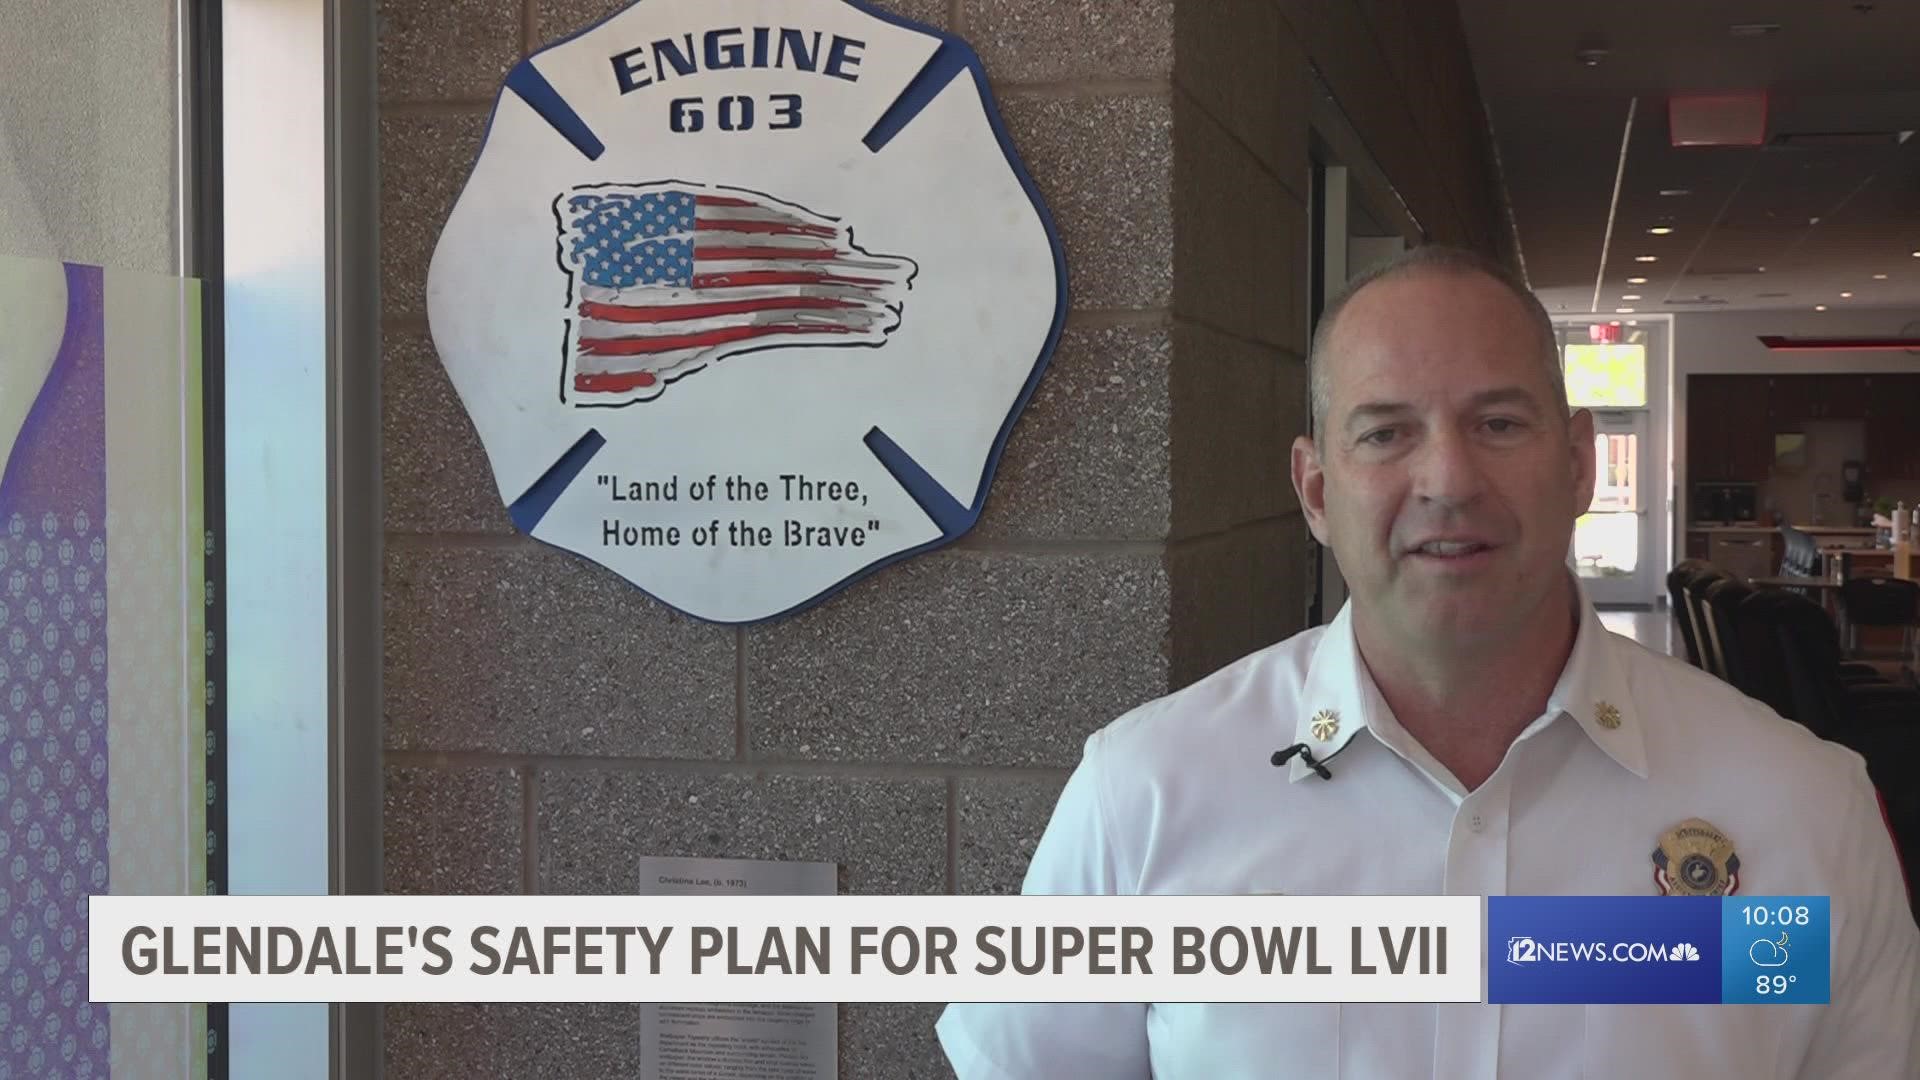 New Glendale fire chief says they are ready to host the Super Bowl in February.